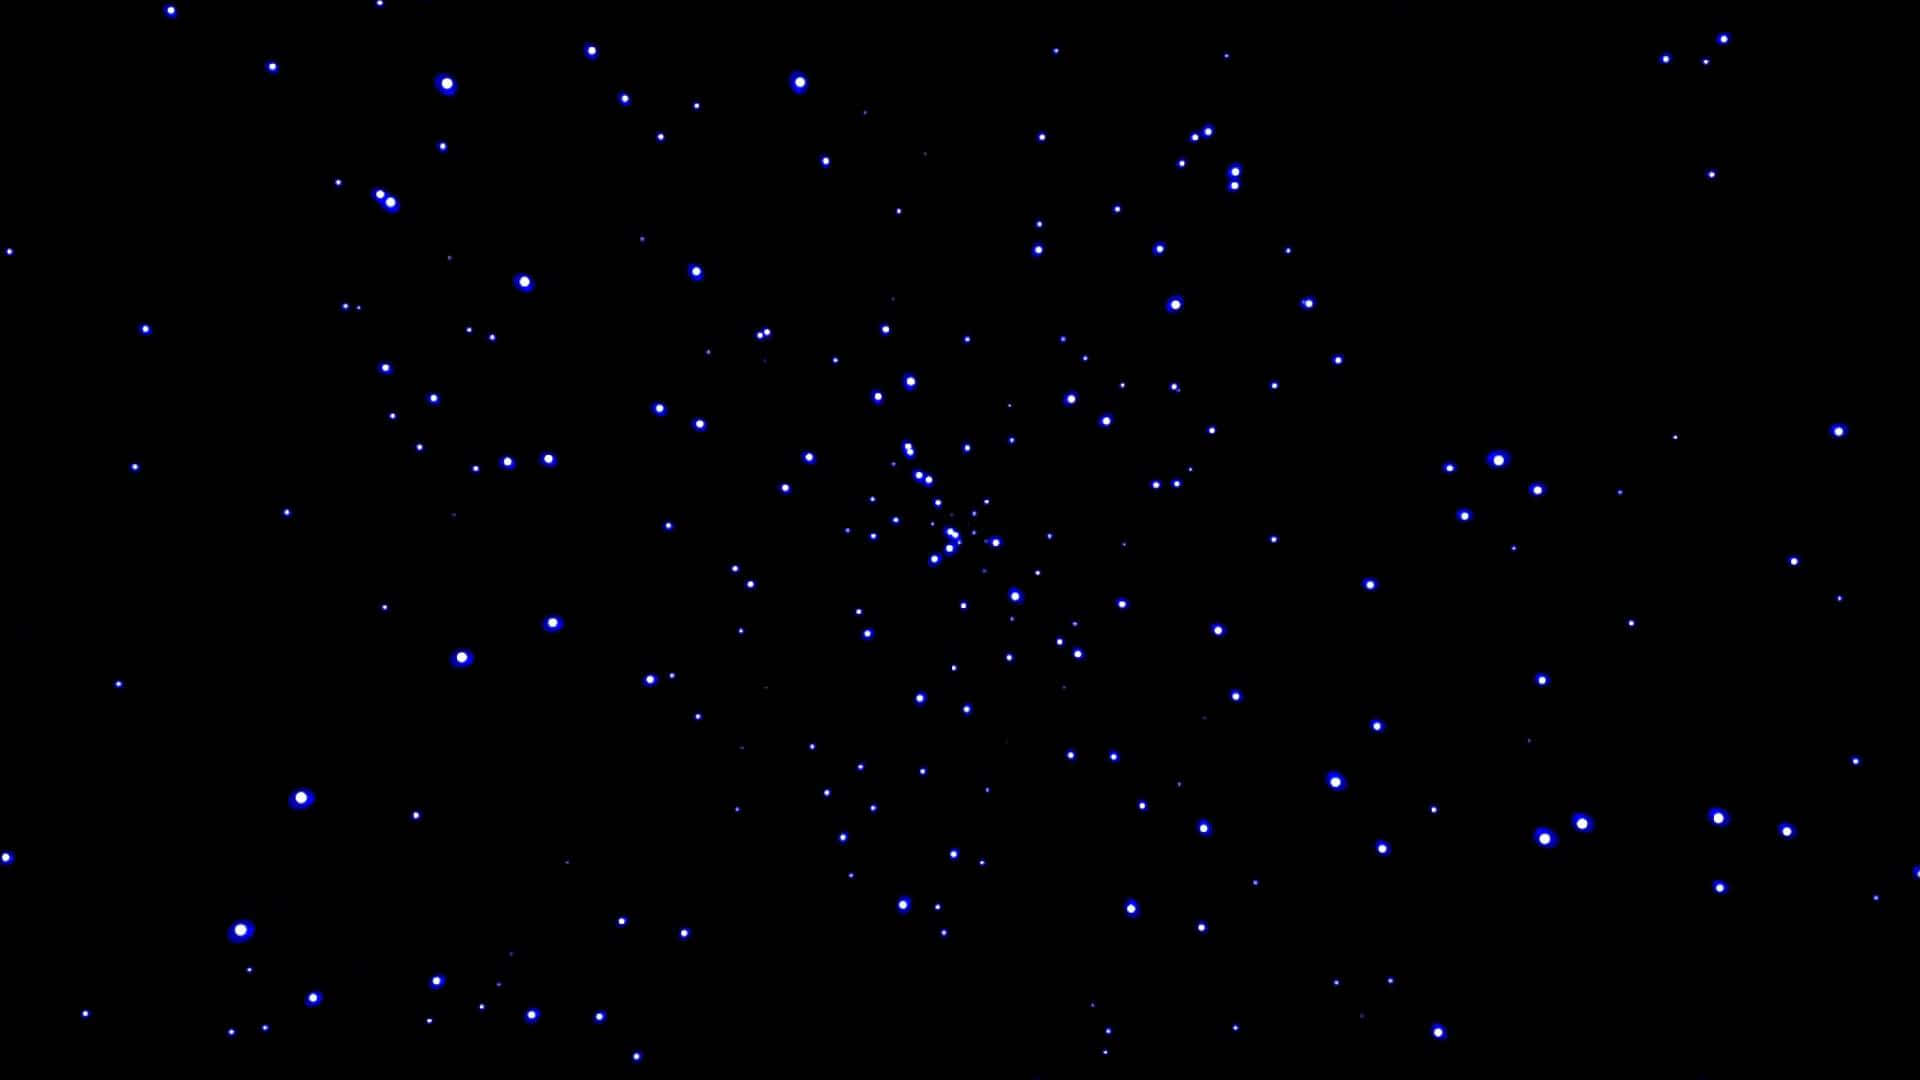 View of a vast black space filled with stars and planets